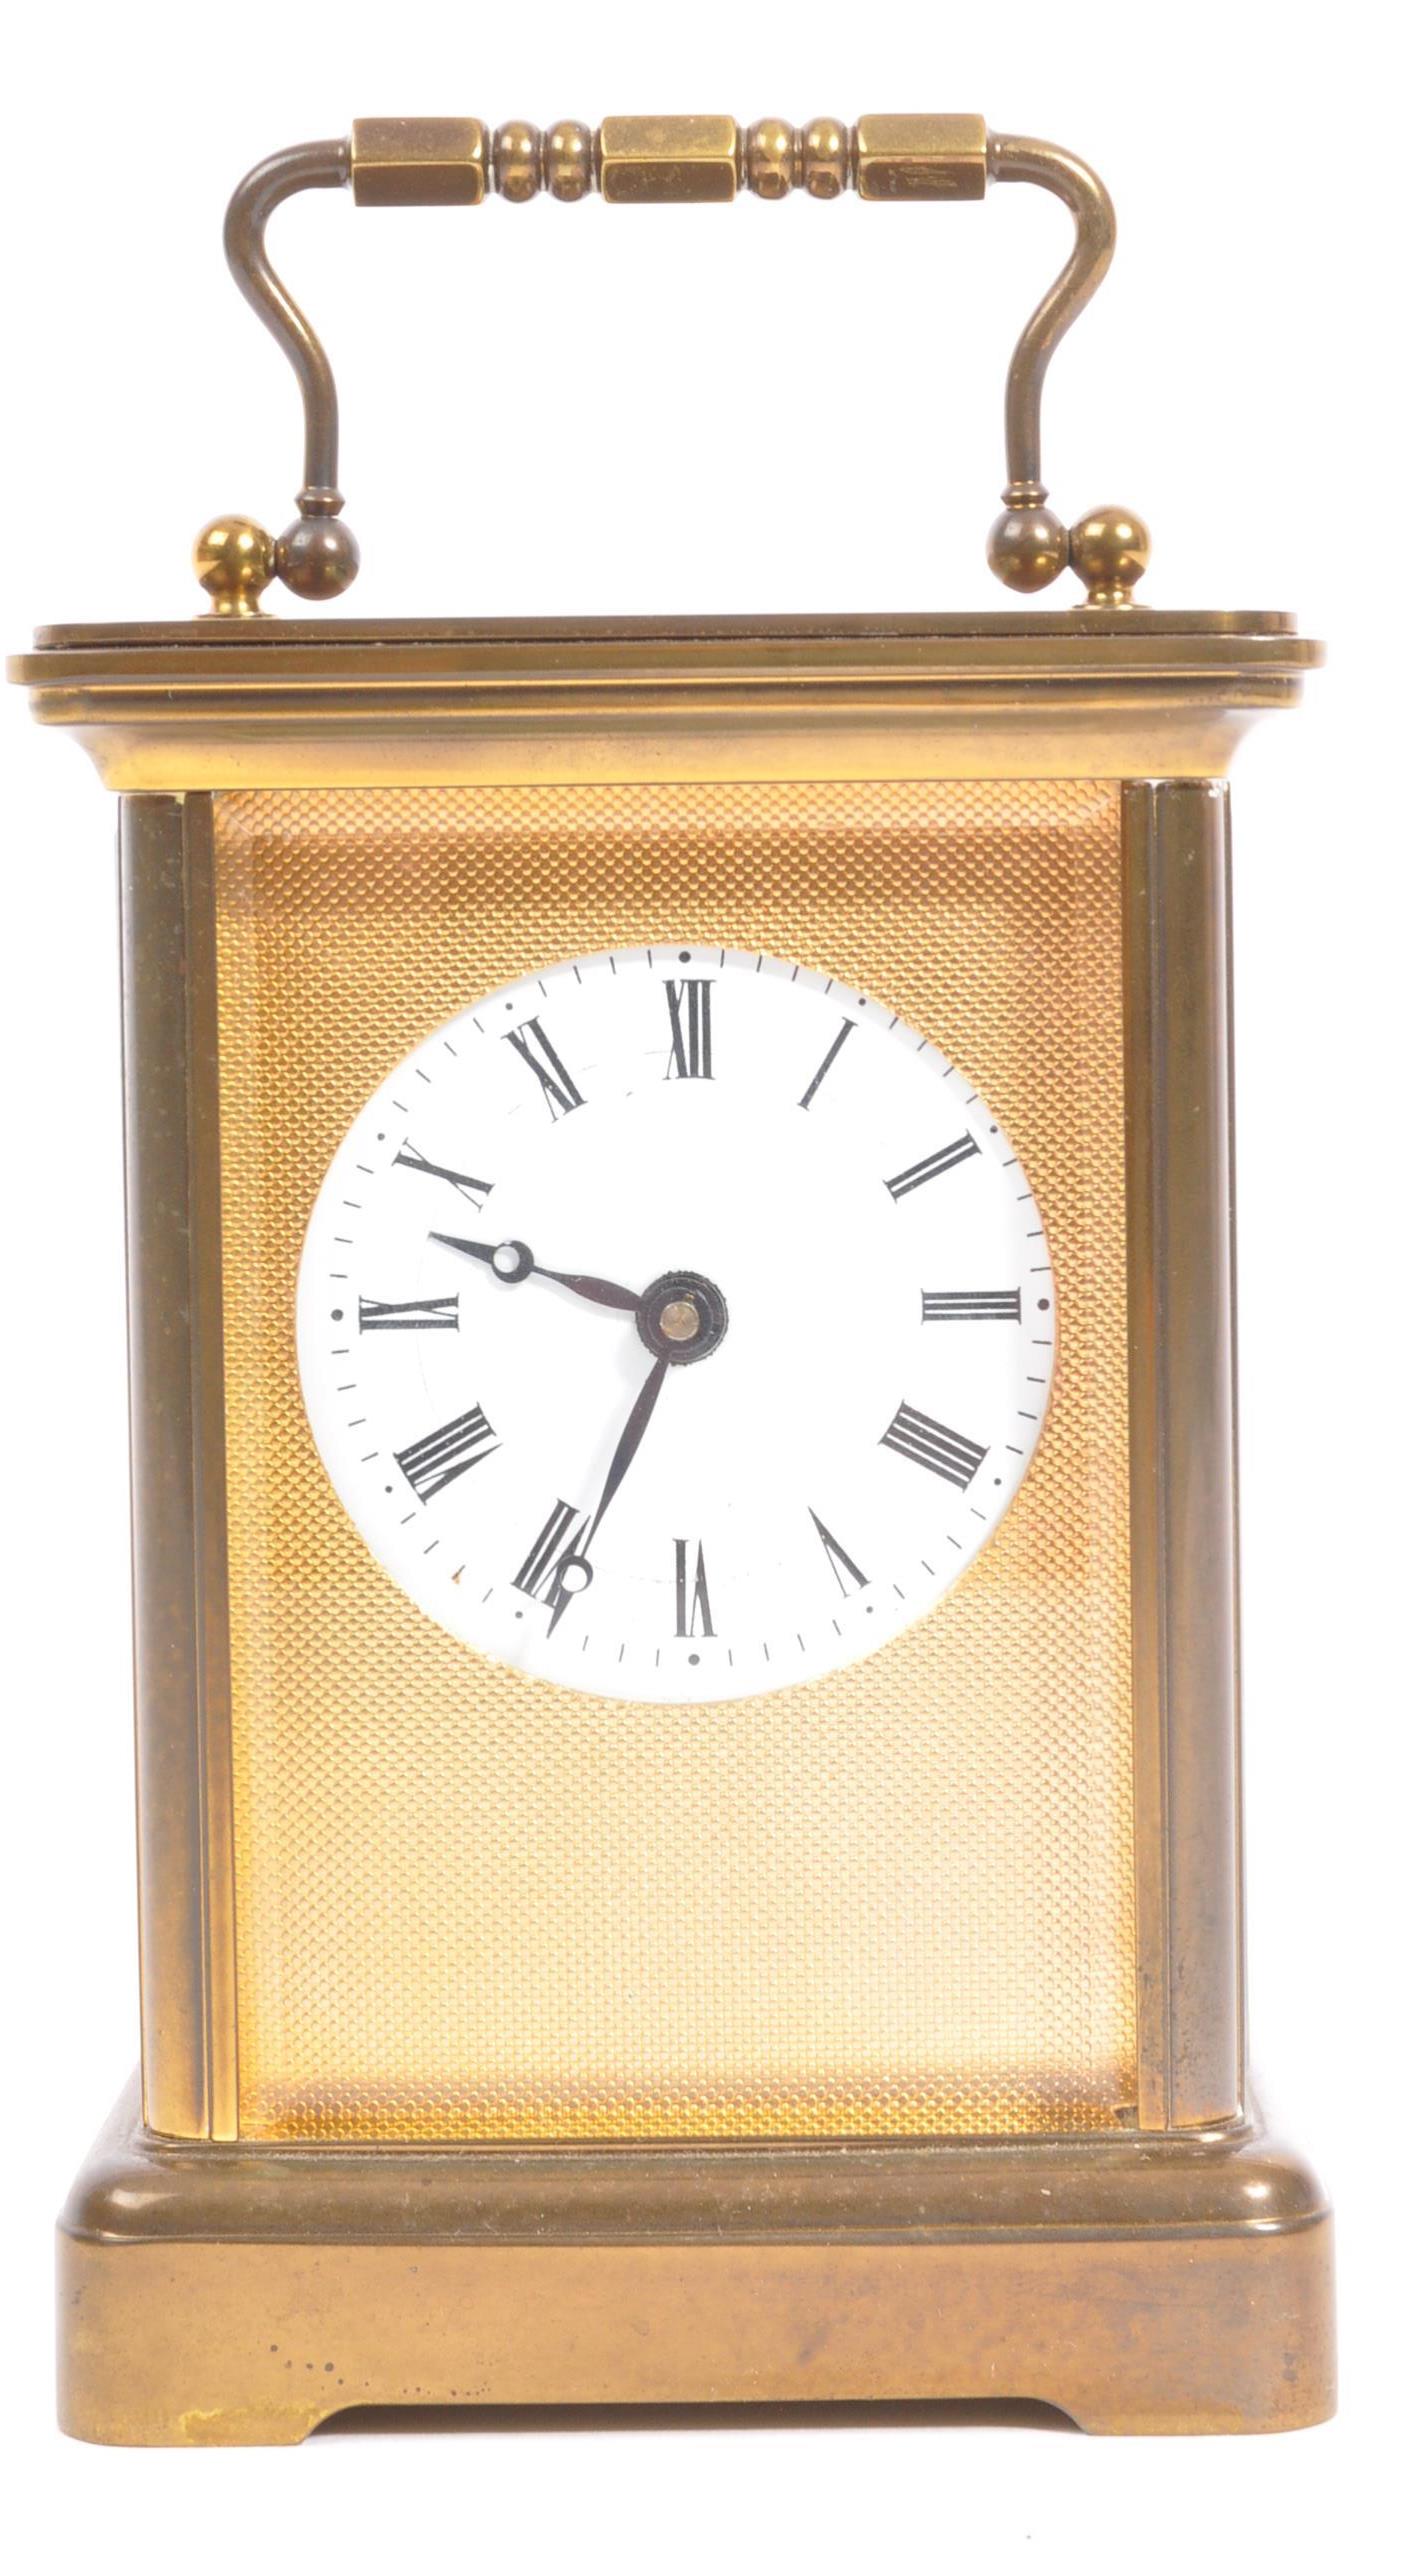 TWO EARLY 20TH CENTURY BRASS CARRIAGE CLOCK - Image 5 of 7